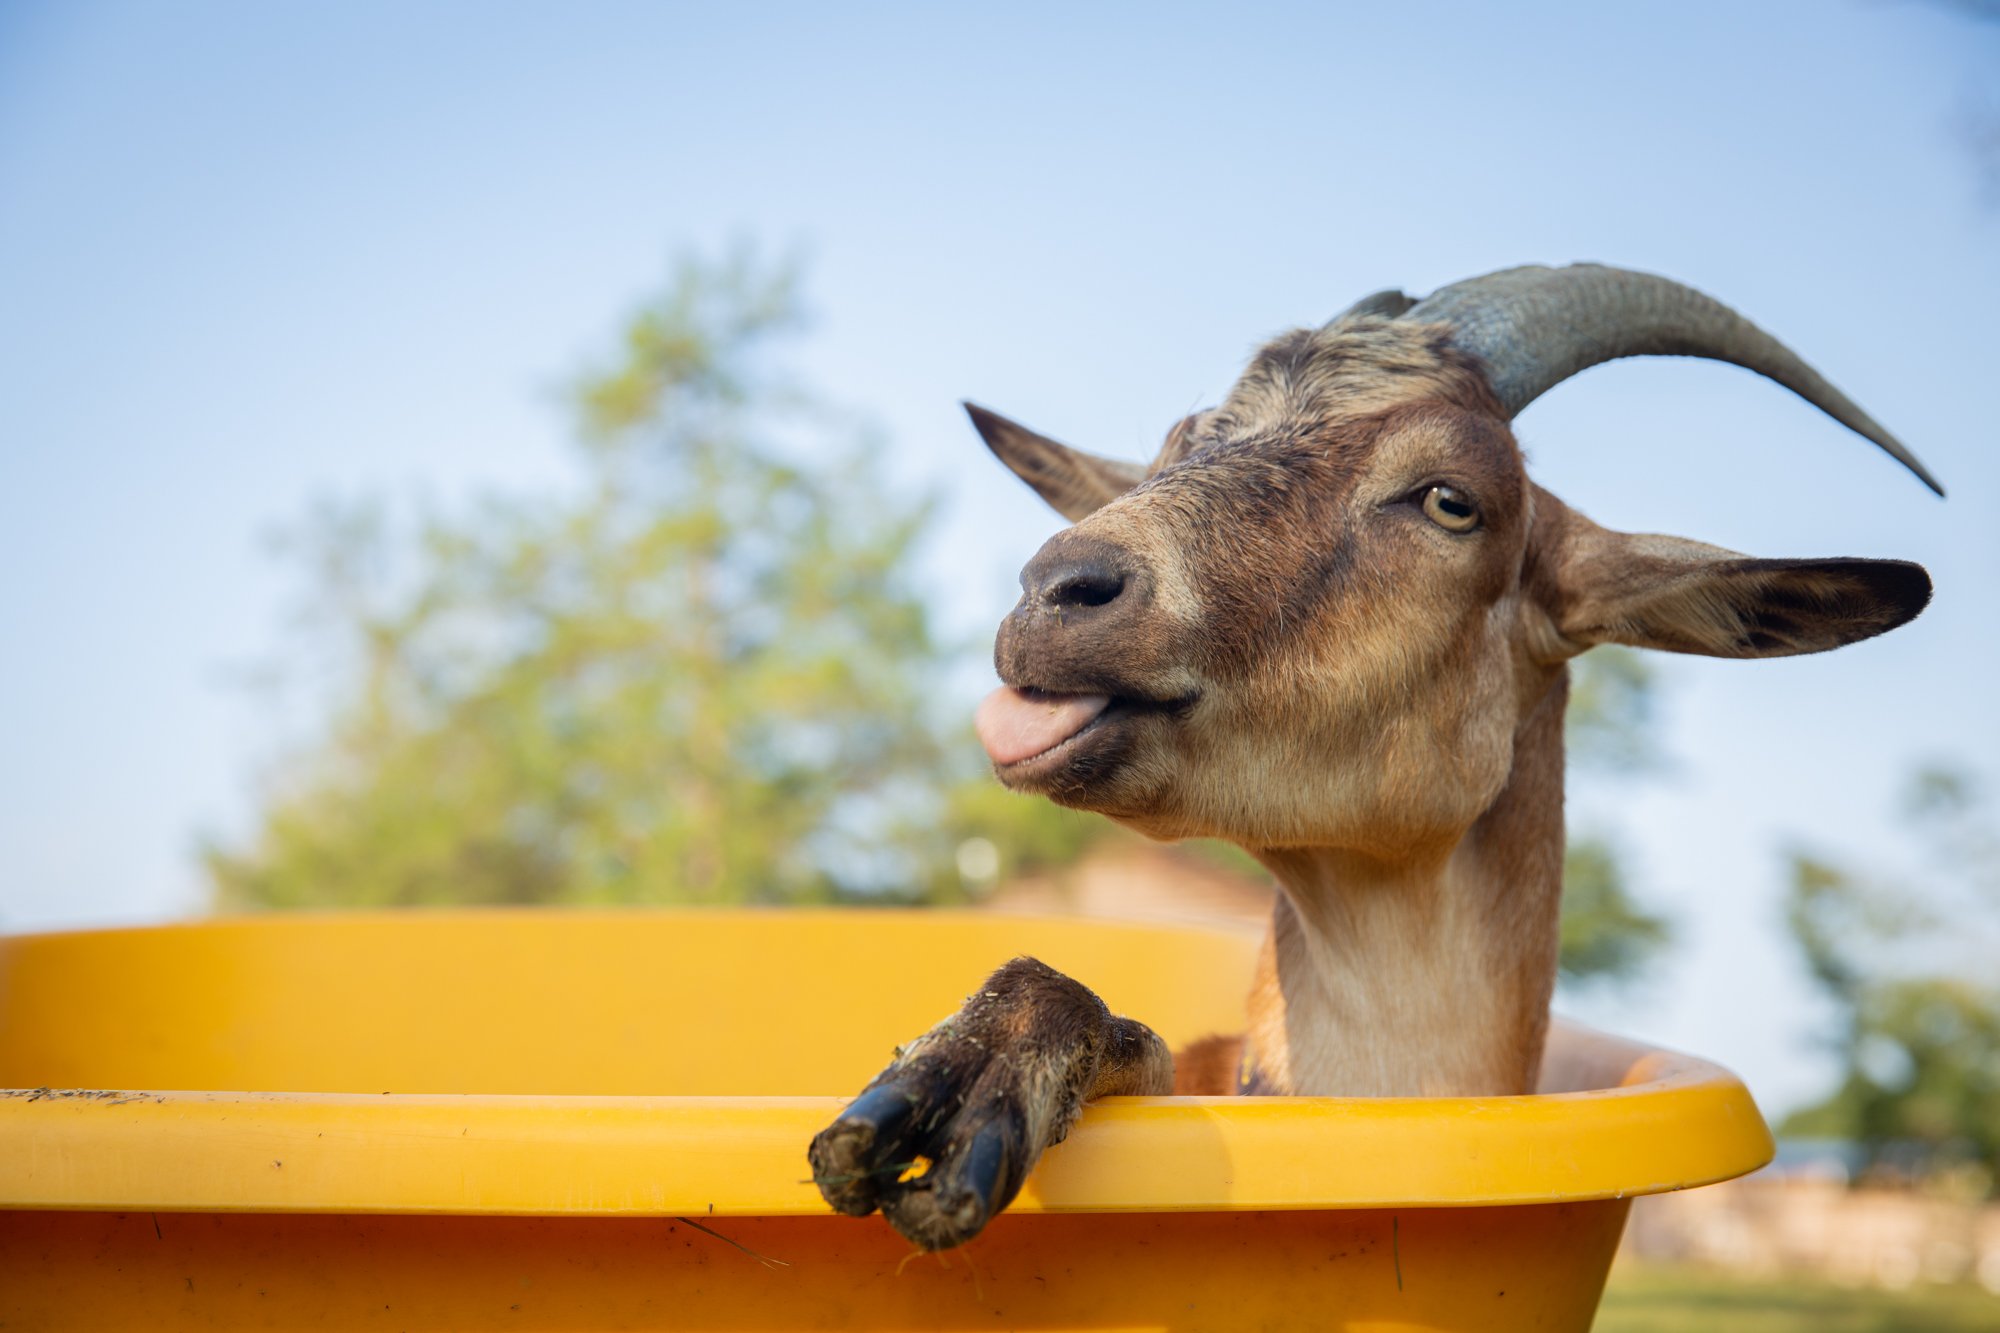  “Not all goats are friendly. They’re friendly here because they spend a lot of time with humans because we treat them like pets,” said Vergara. 